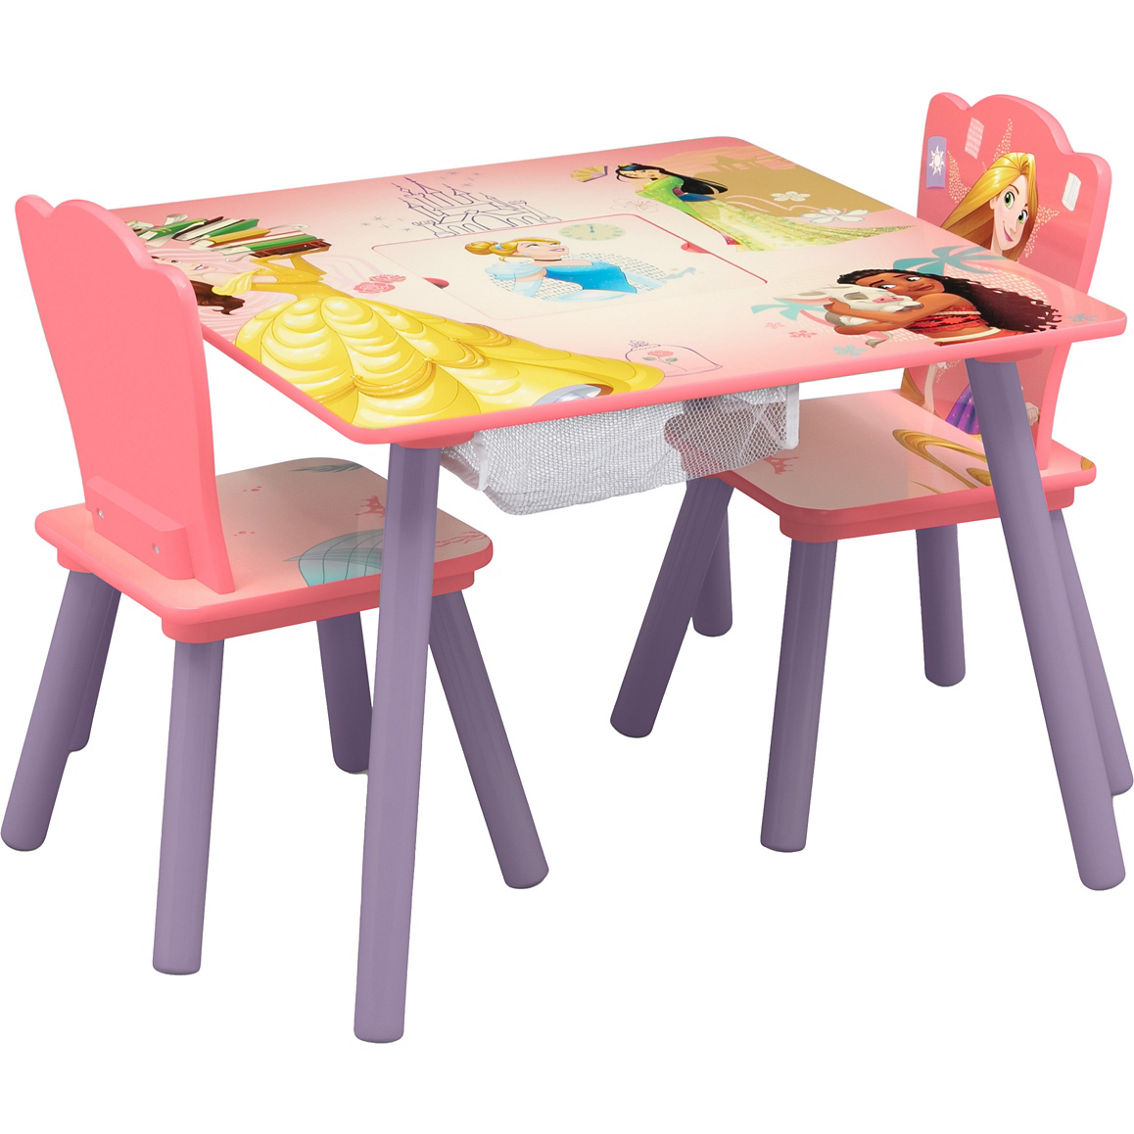 Delta Children Disney Princess Table and Chair Set with Storage - Image 2 of 5